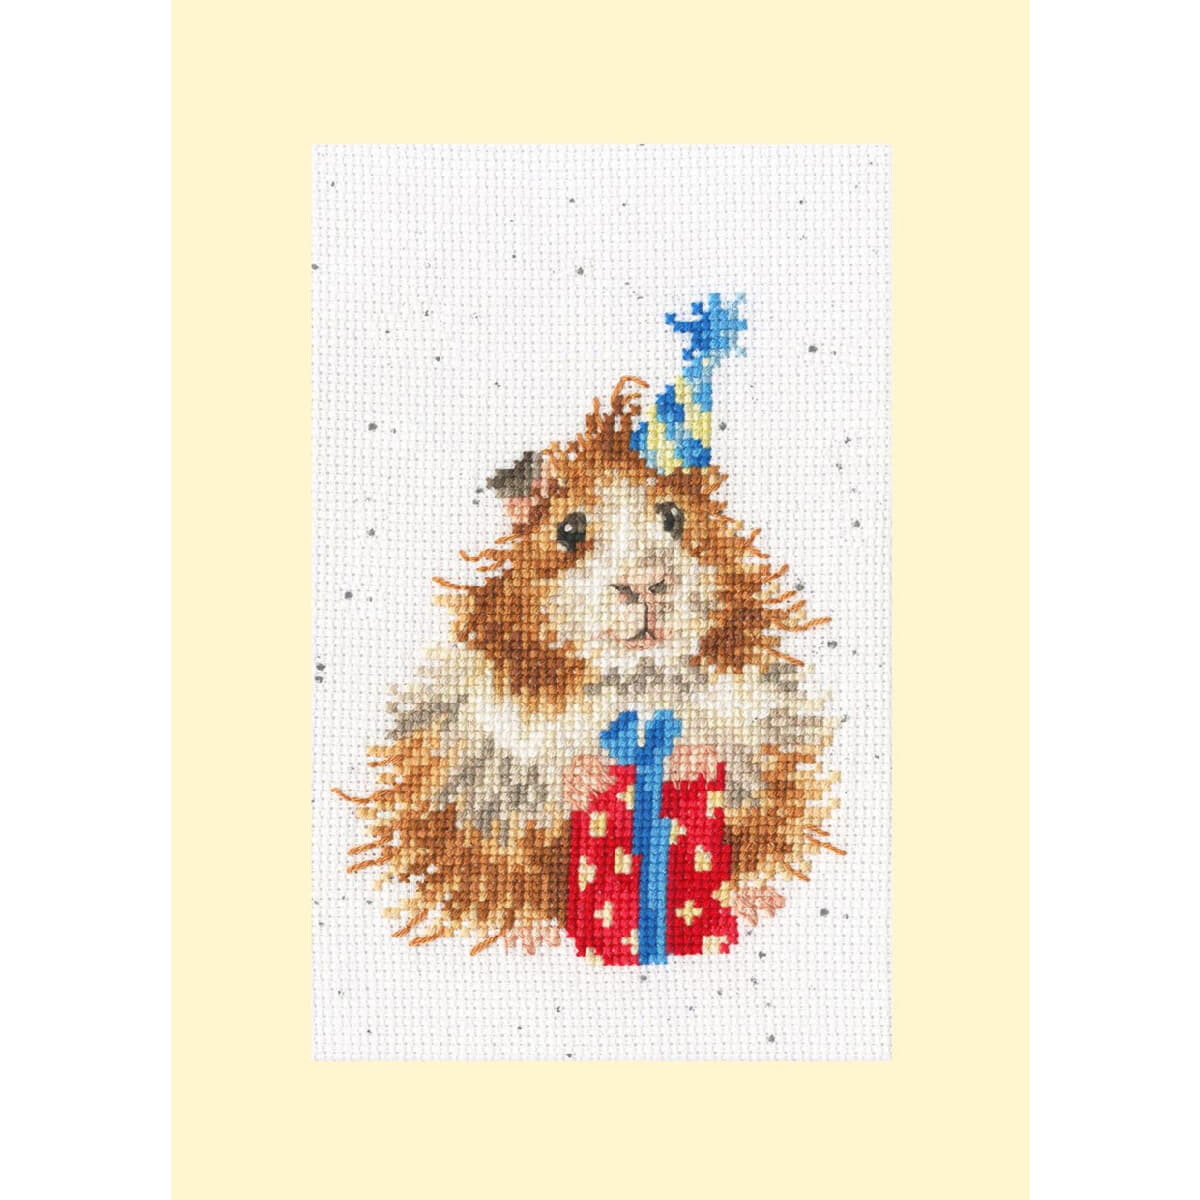 An embroidery pack from Bothy Threads with a fluffy...